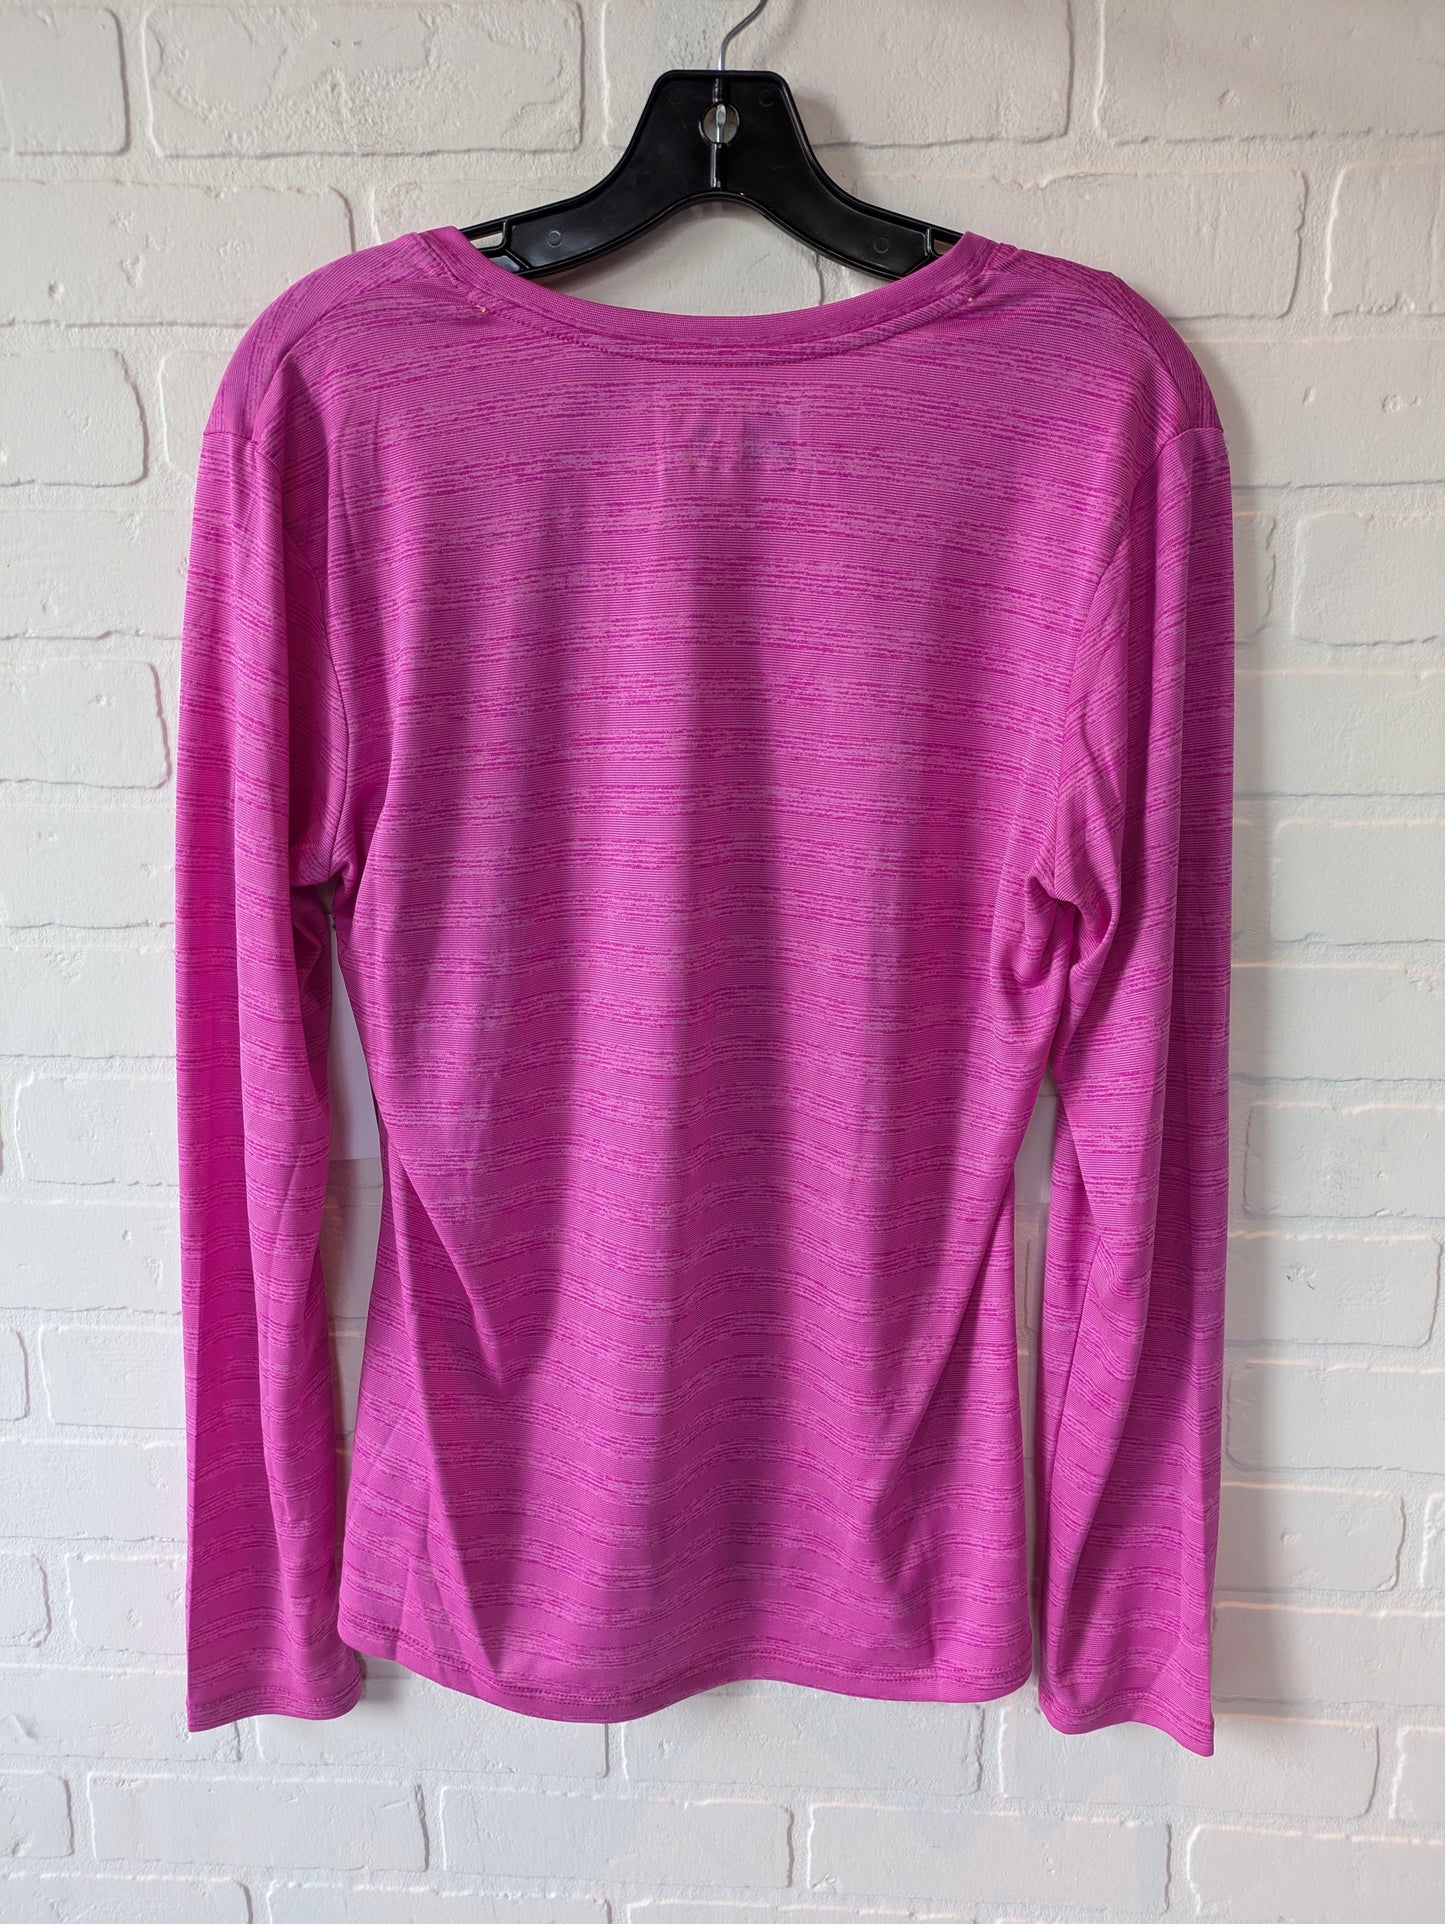 Pink Athletic Top Long Sleeve Crewneck Rbx, Size L